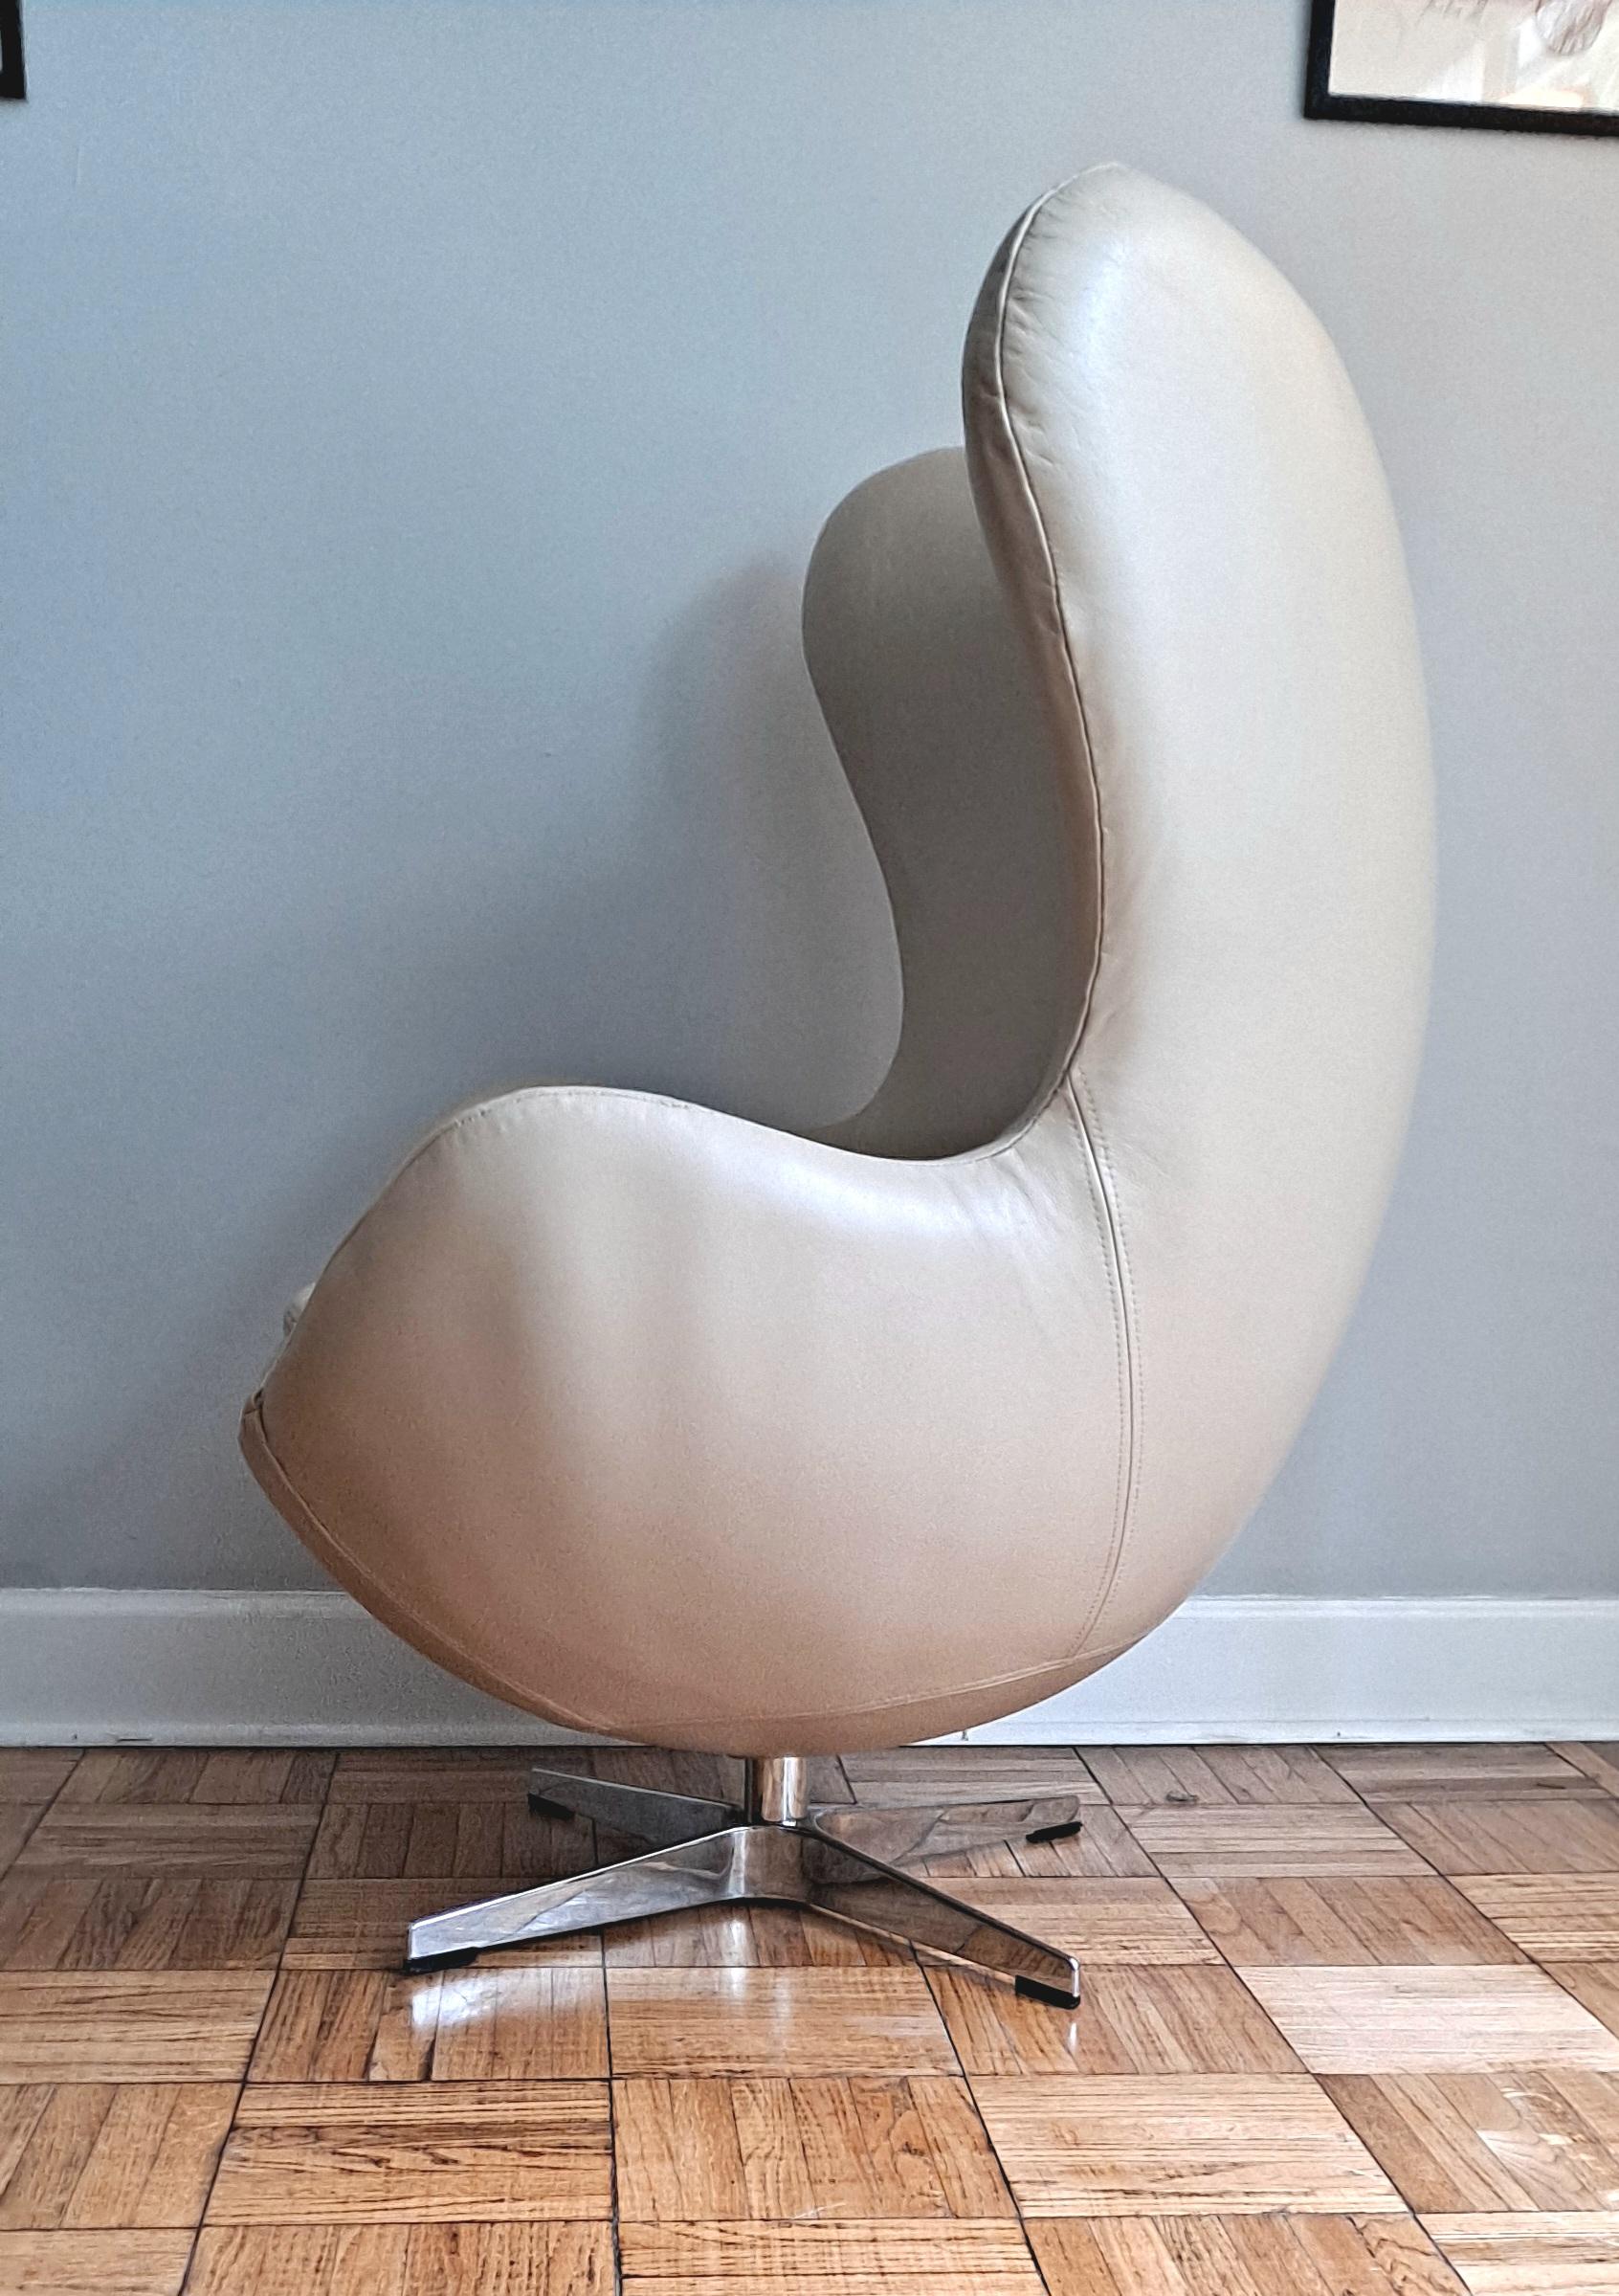 The Egg™ chair by Arne Jacobsen is a masterpiece of Danish design. Jacobsen found the perfect shape for the chair by experimenting with wire and plaster in his garage. Today, the Egg chair is recognized worldwide as one of the triumphs of Jacobsen’s